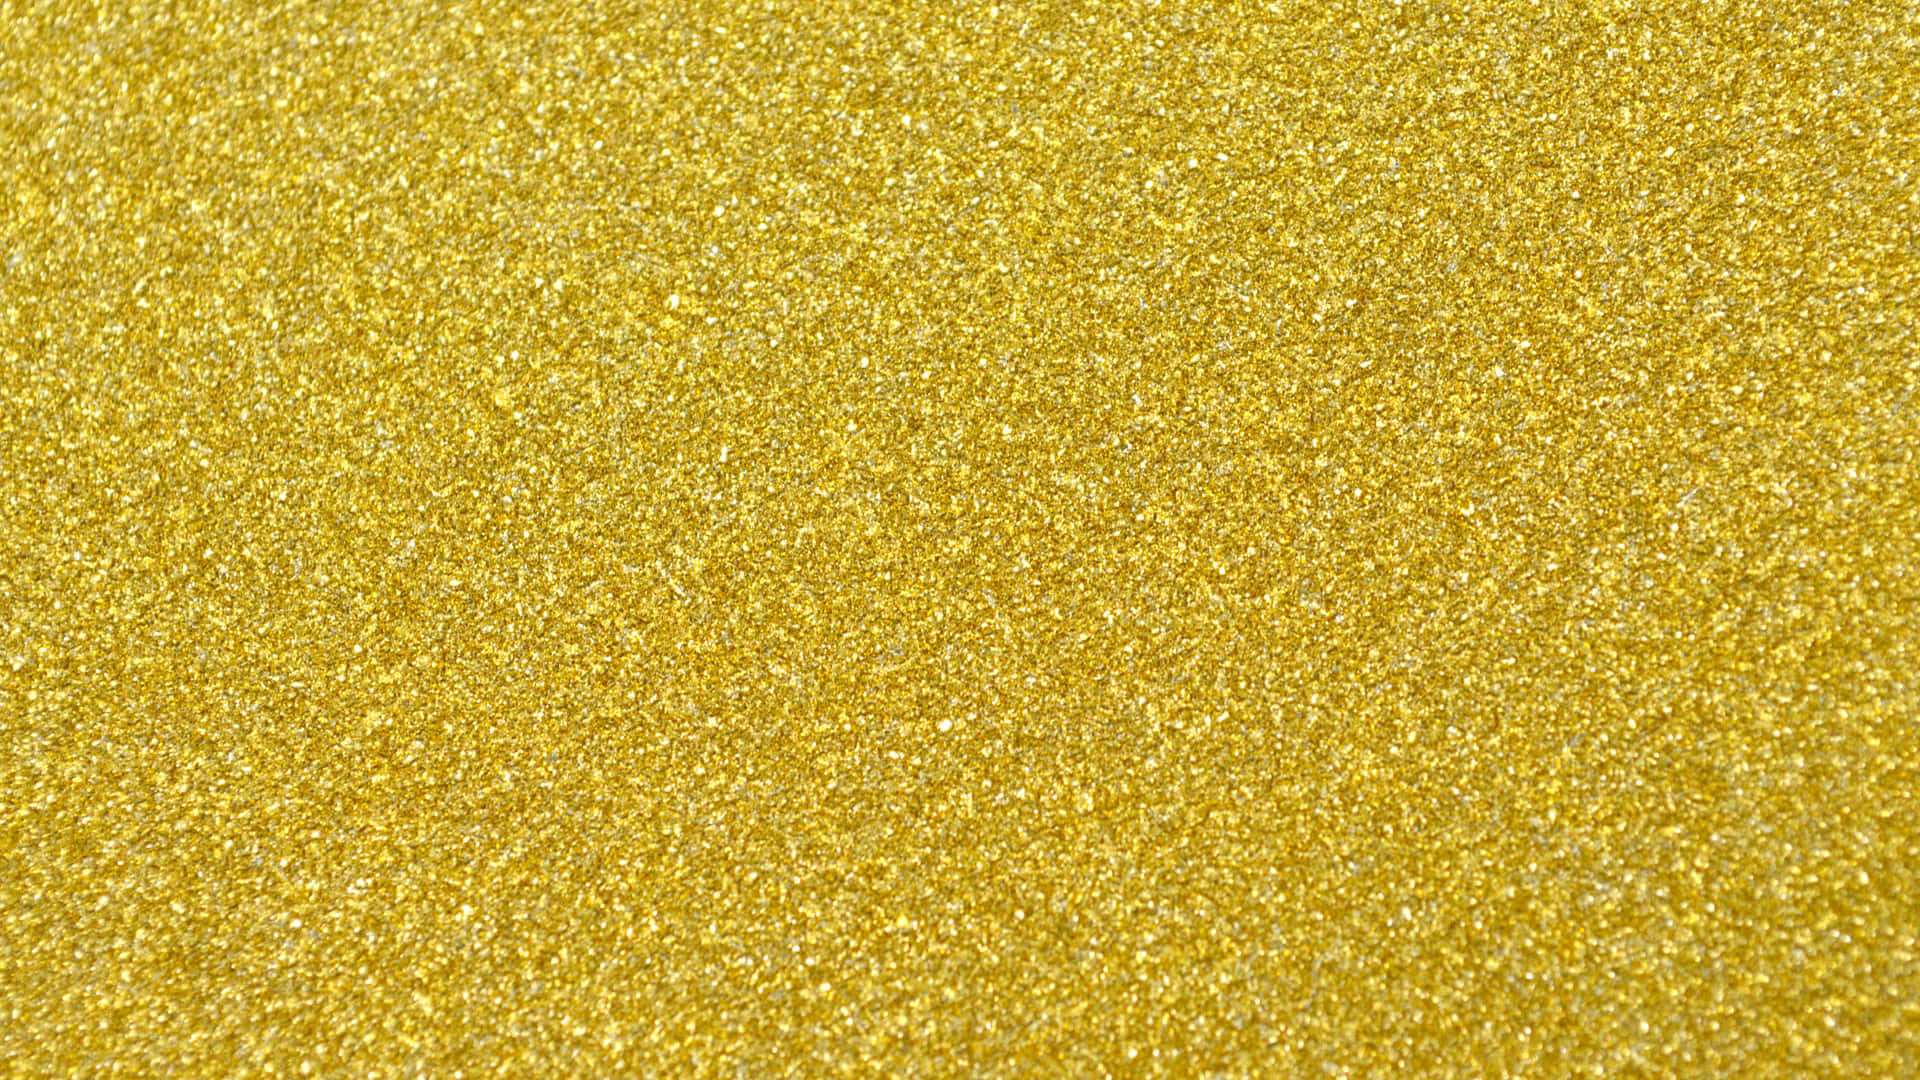 "Bring a Shine of Happiness to Your Life with Yellow Glitter" Wallpaper